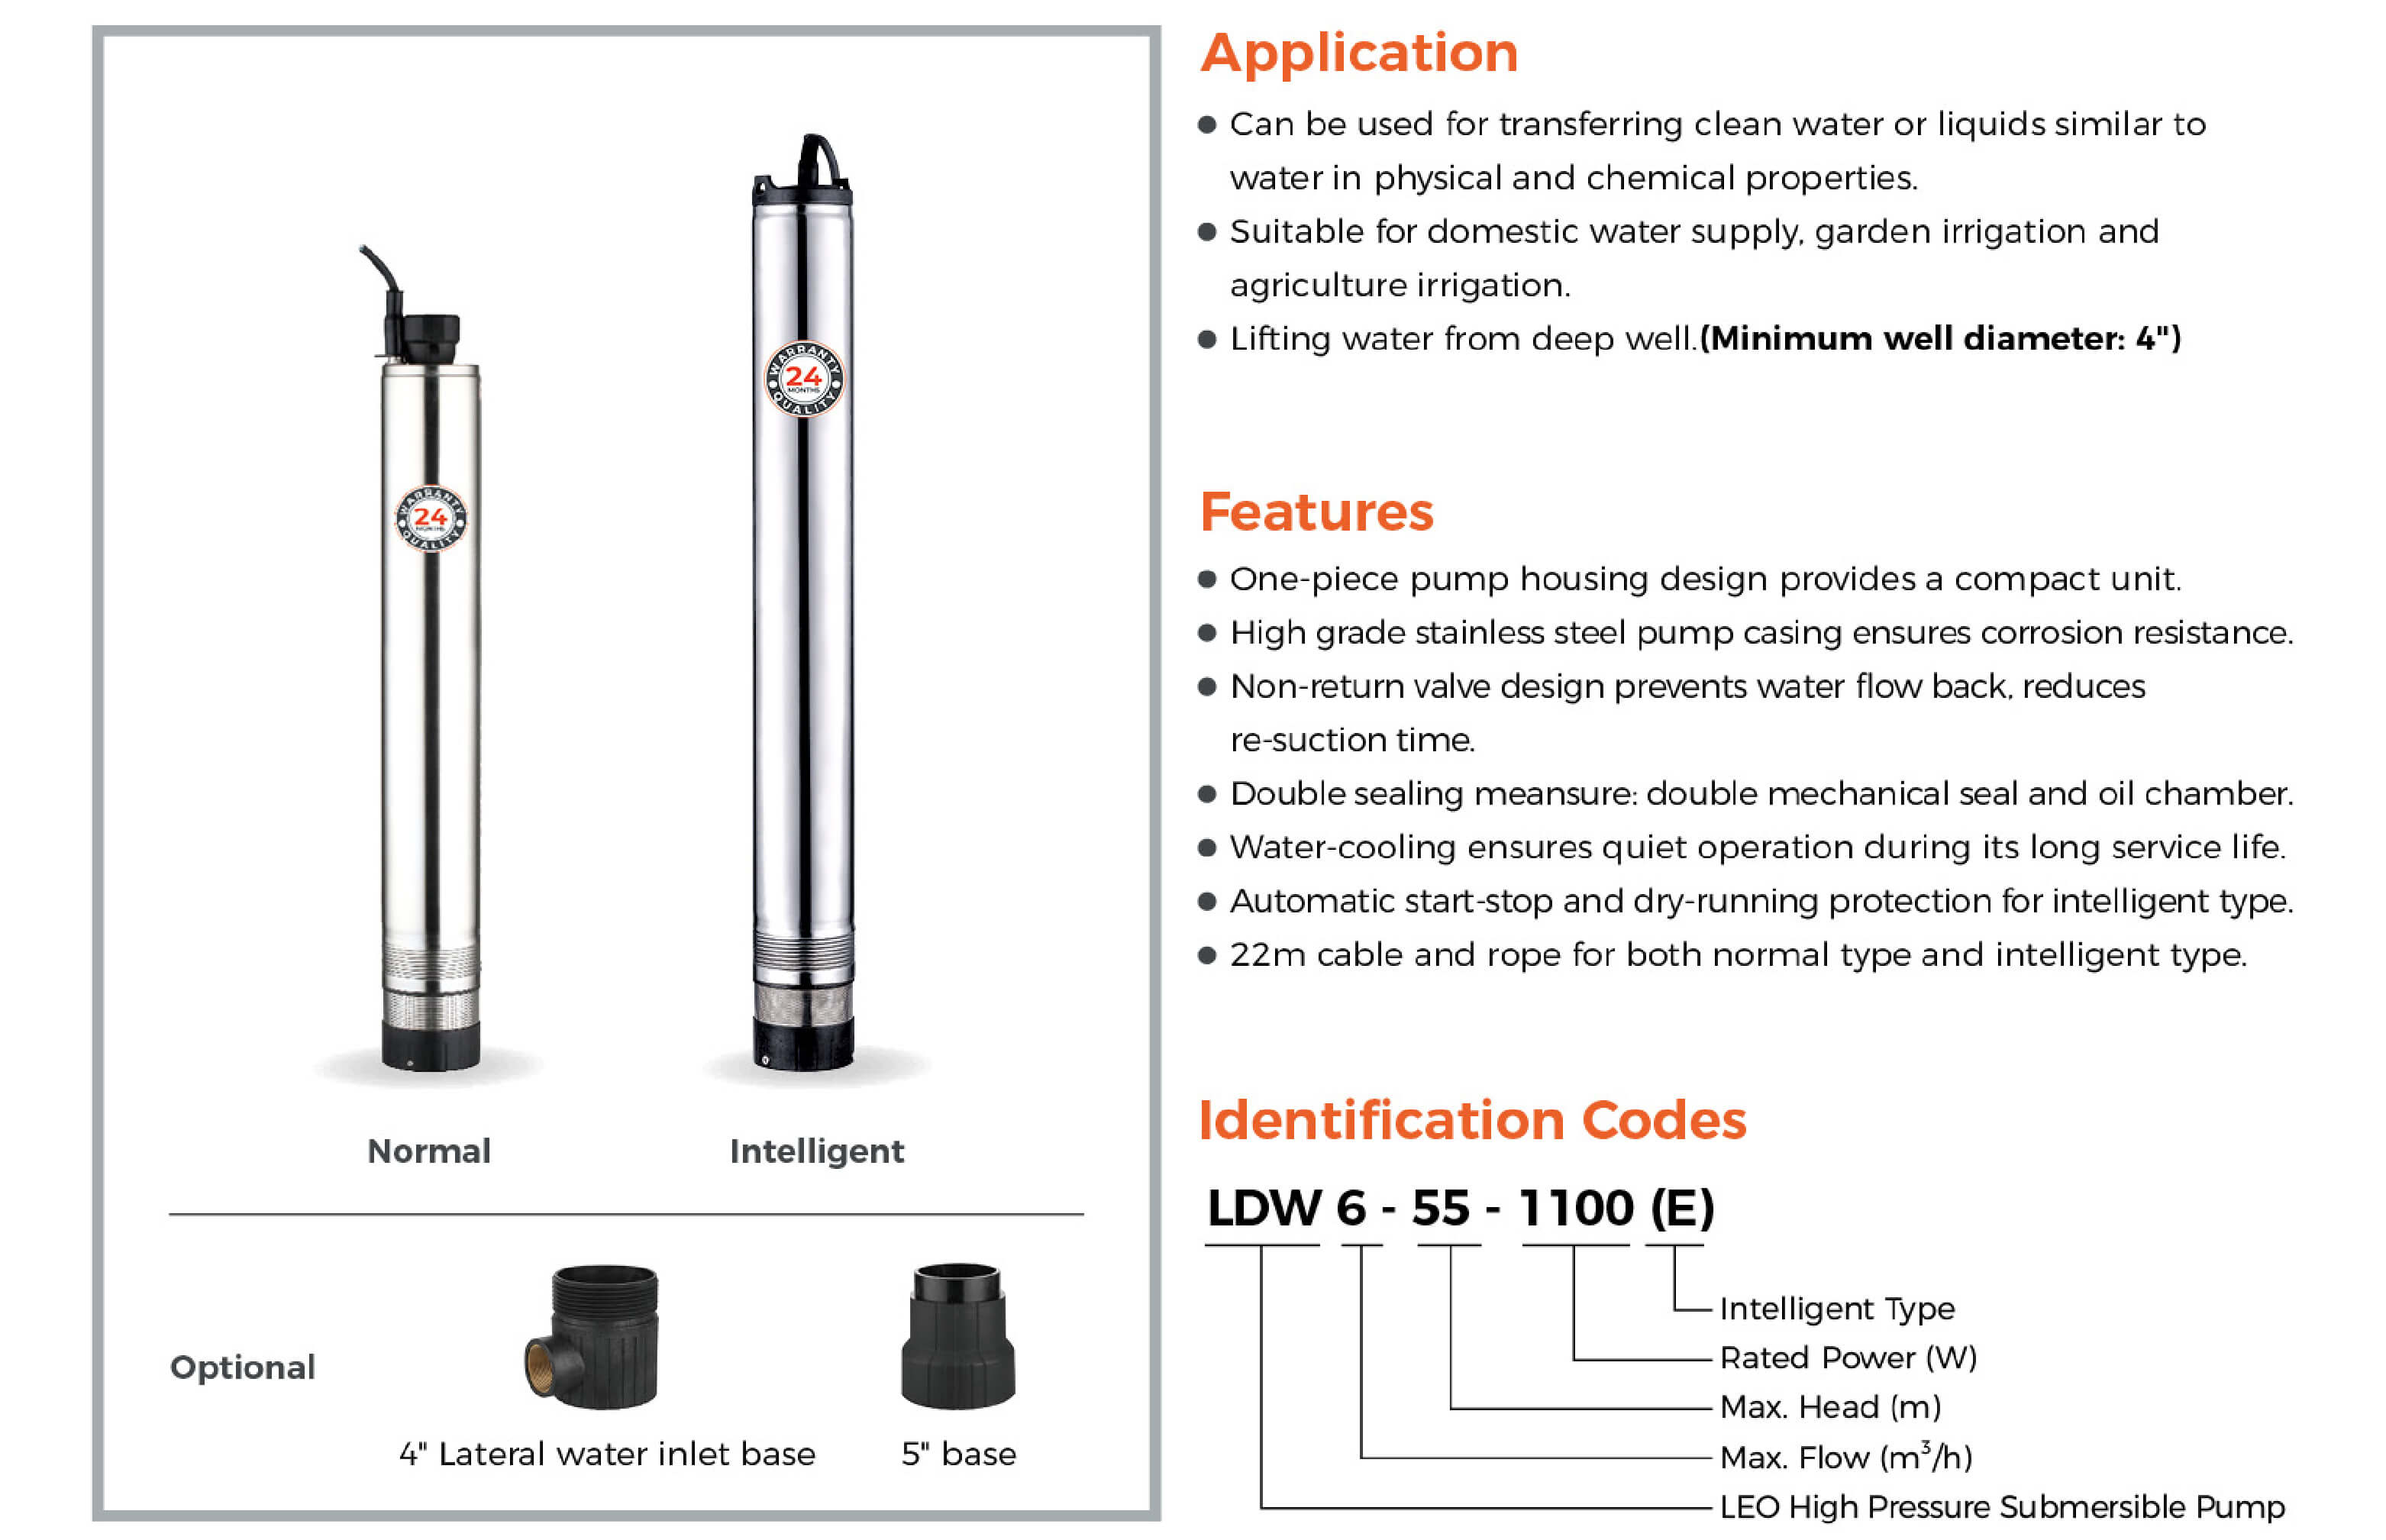 LDW High Pressure Submersible Pump Features